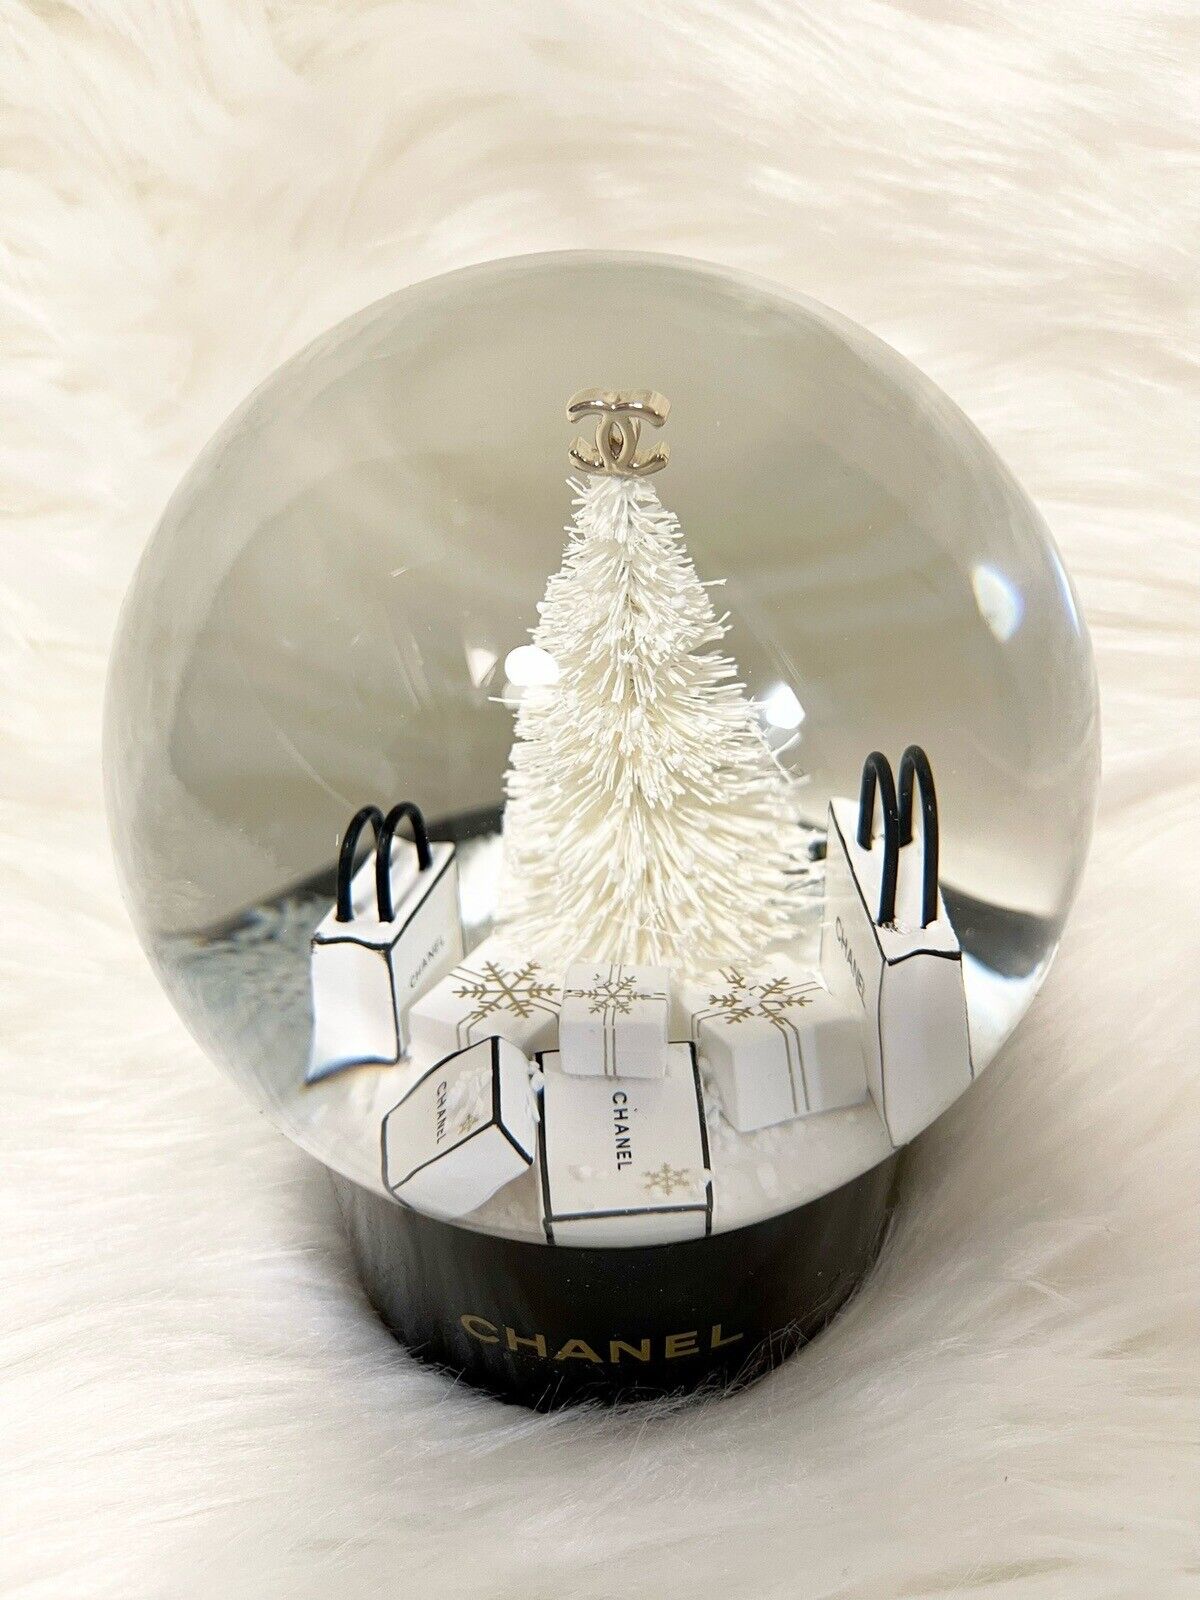 Authentic Chanel Snow Globe Large Limited Edition Valentine’s Day Birthday Gift